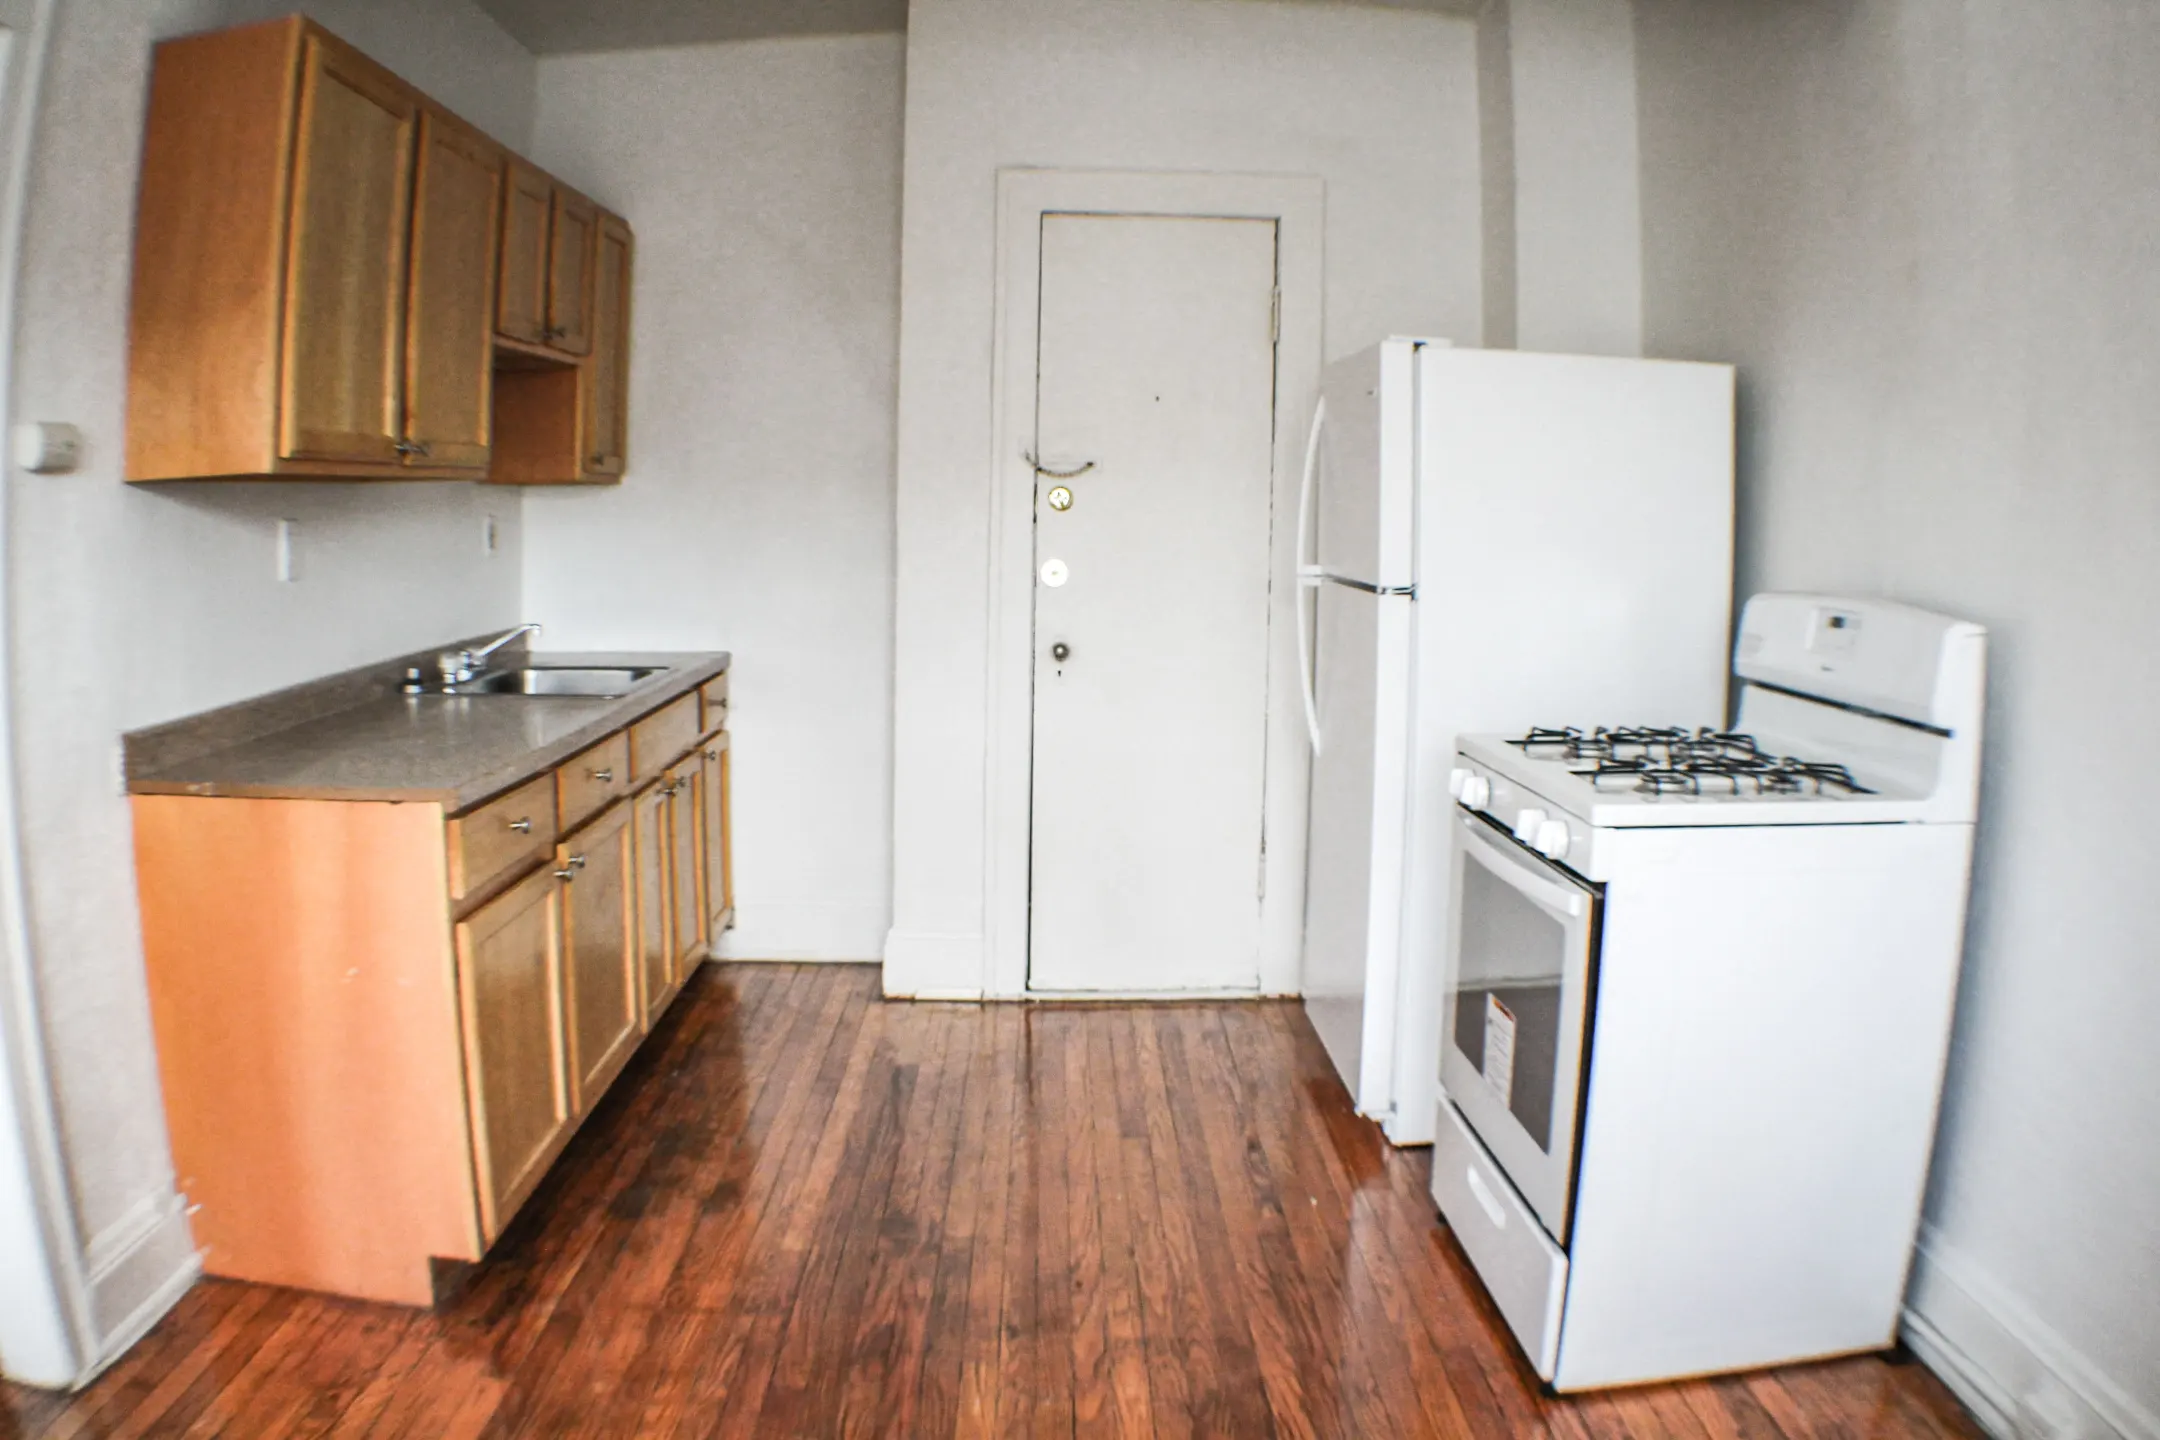 Kitchen - Essex Morley Apartments - Cleveland Heights, OH